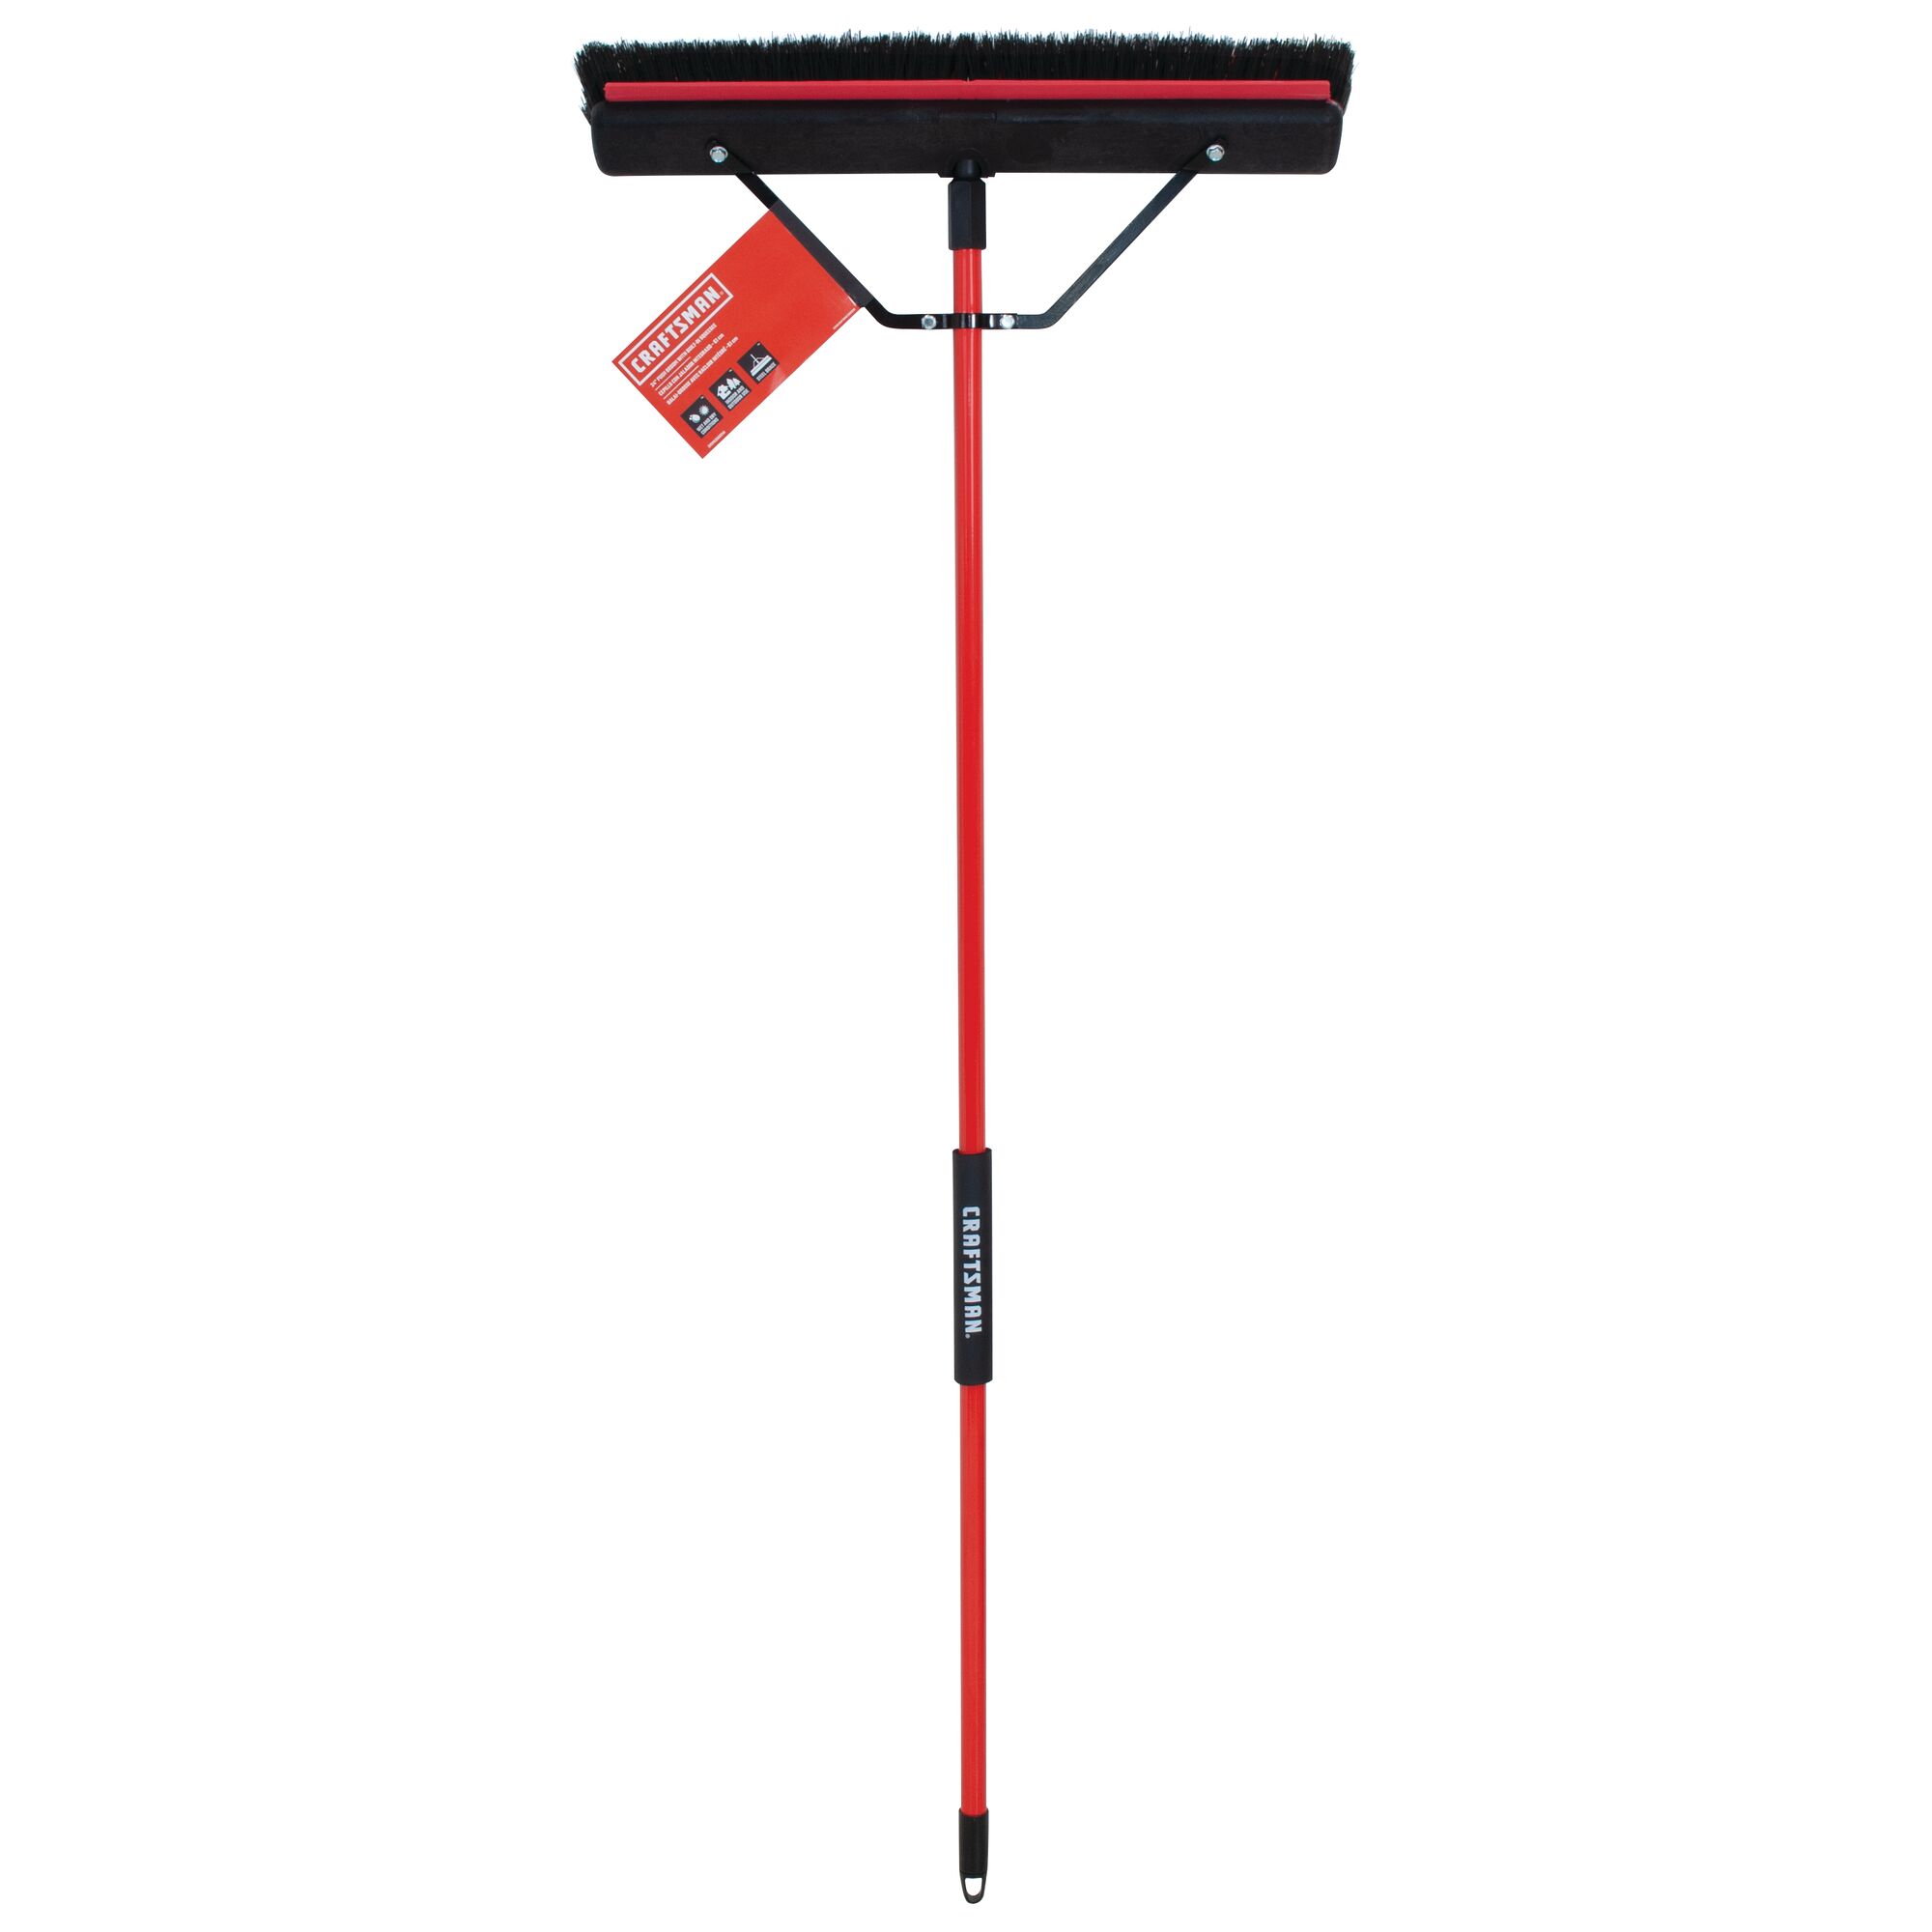 Profile of 24 inch push broom with built in squeegee.